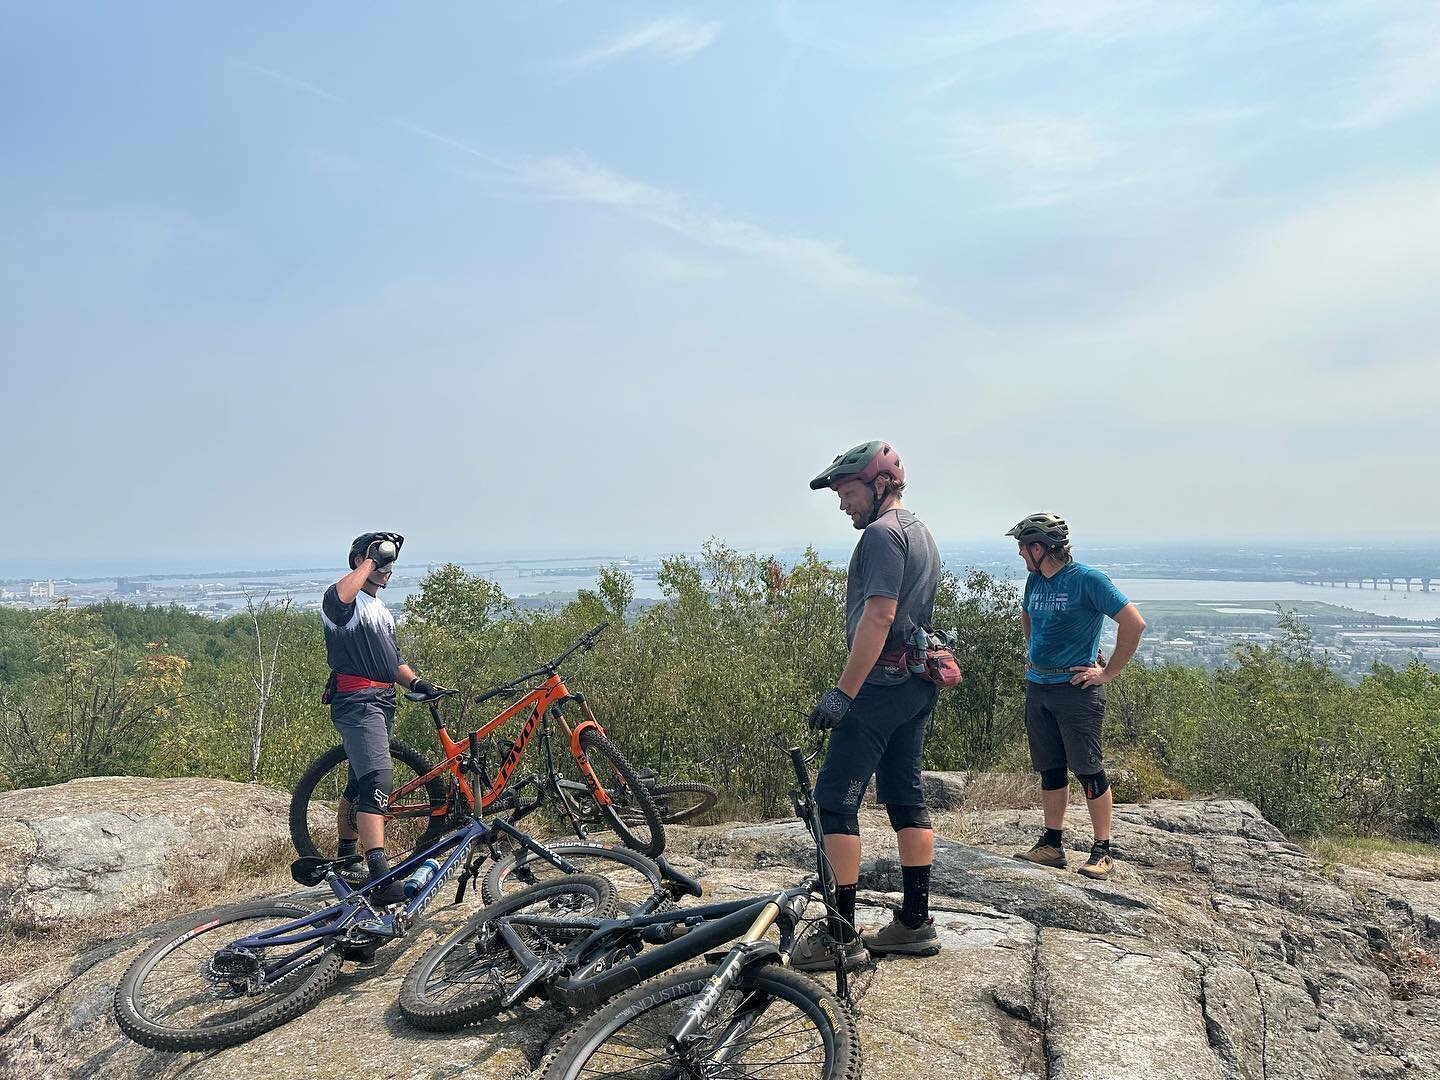 ‼️Attention Rocky Rumble riders‼️ We&rsquo;re just one week away from the first Duluth Rocky Rumble weekend enduro! Where else can you get views like this while also riding some amazing trails? Right here at the Duluth Rocky Rumble! Get signed up tod